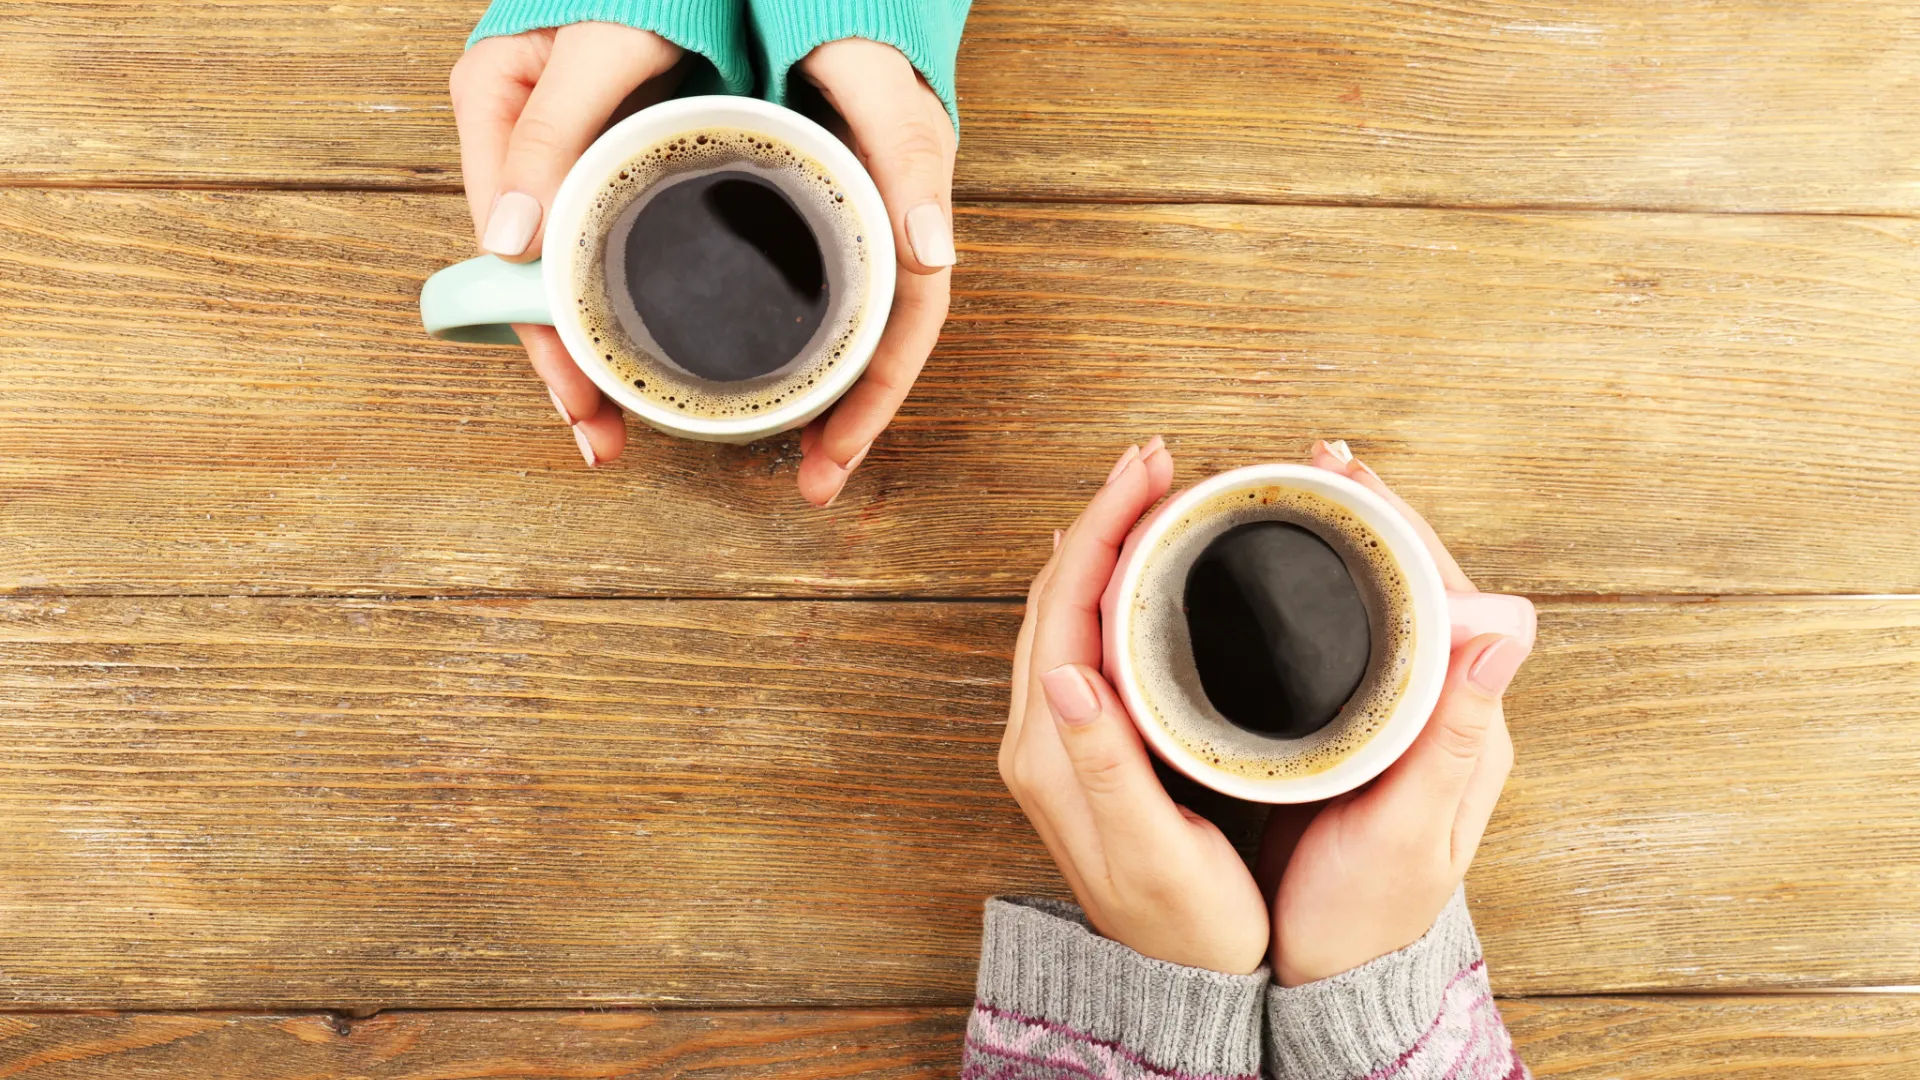 Two pairs of hands holding coffee cups